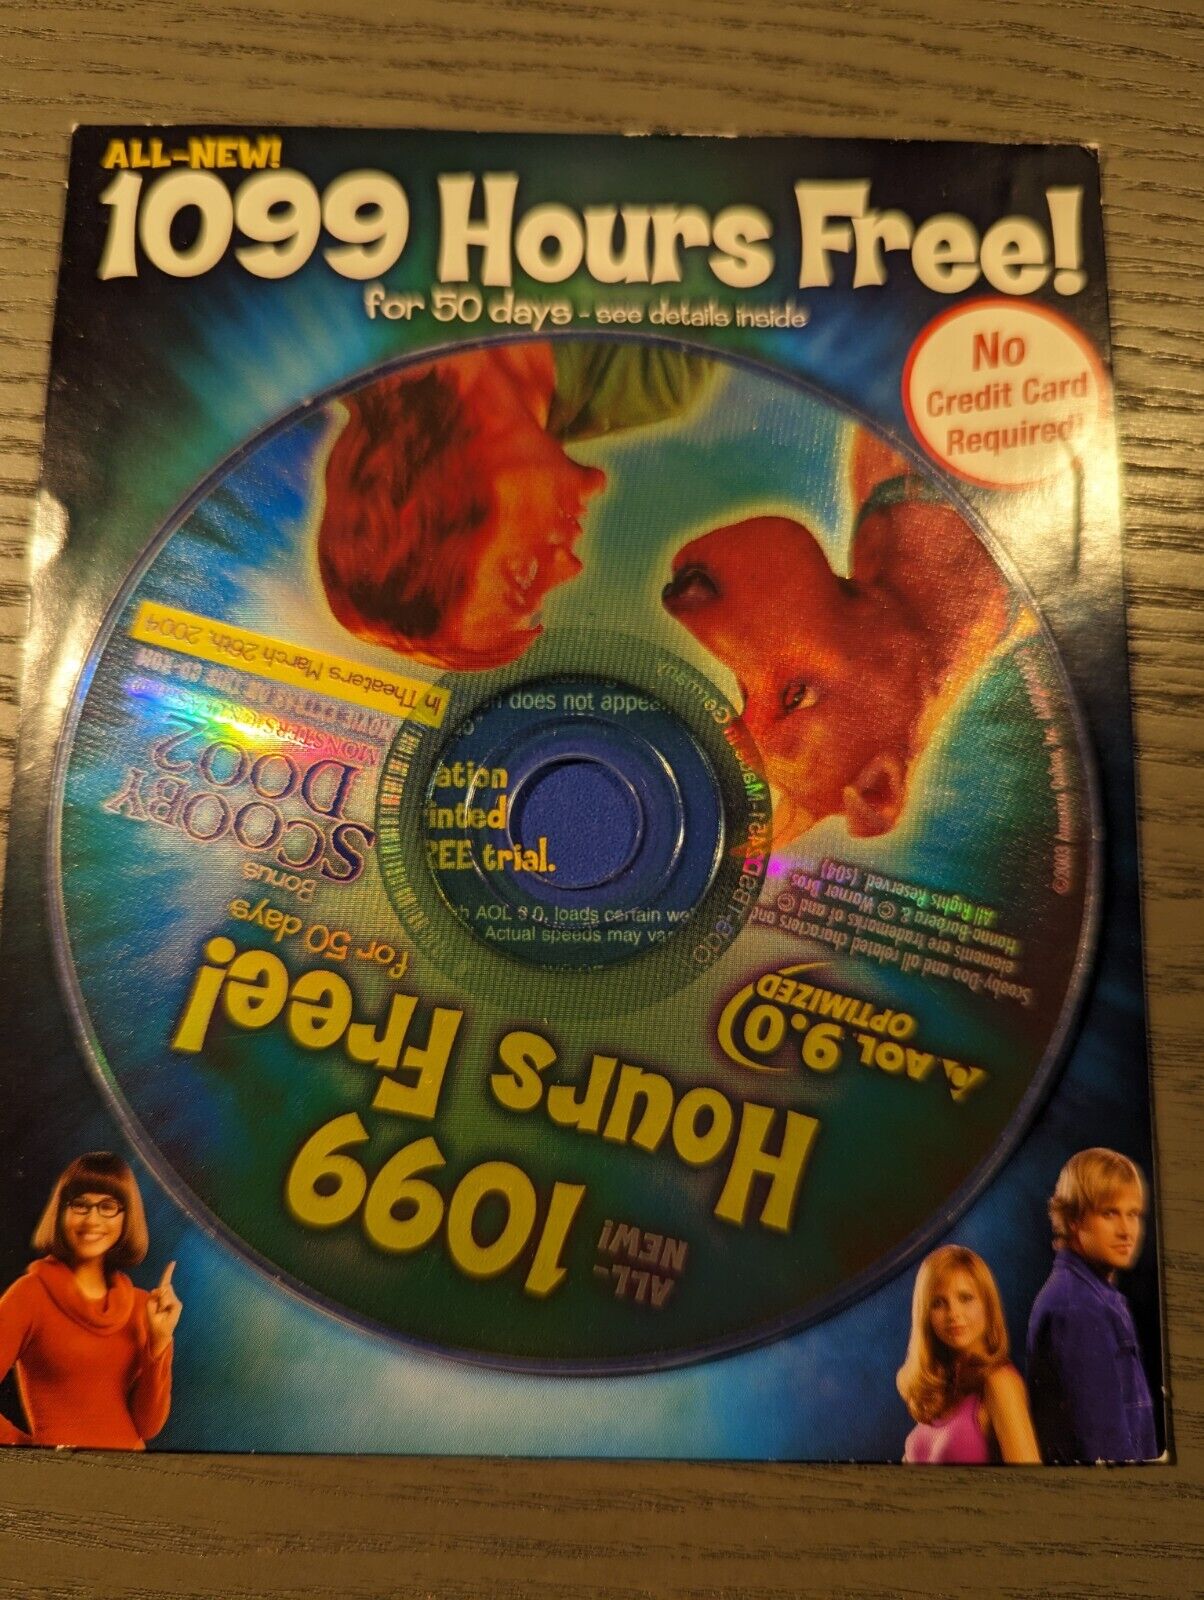 Scooby-Doo AOL 9 Disk CD 1099 hours - Vintage - New